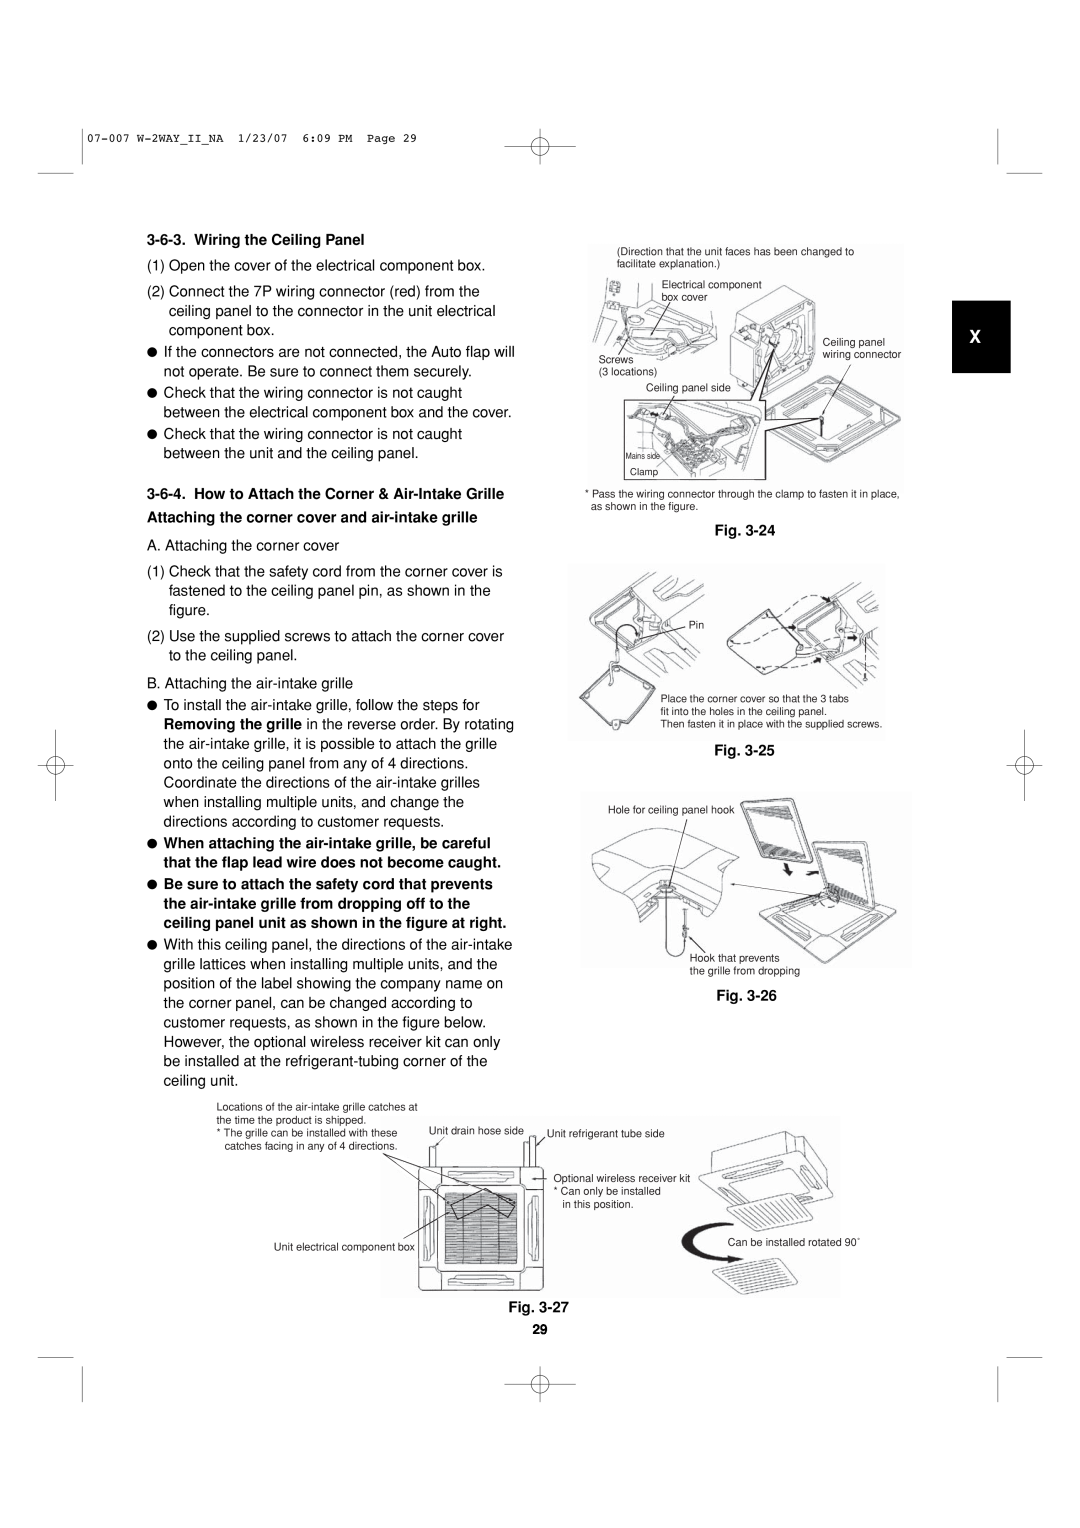 Sanyo 85464359982001 installation instructions Wiring the Ceiling Panel, How to Attach the Corner & Air-IntakeGrille, Fig 